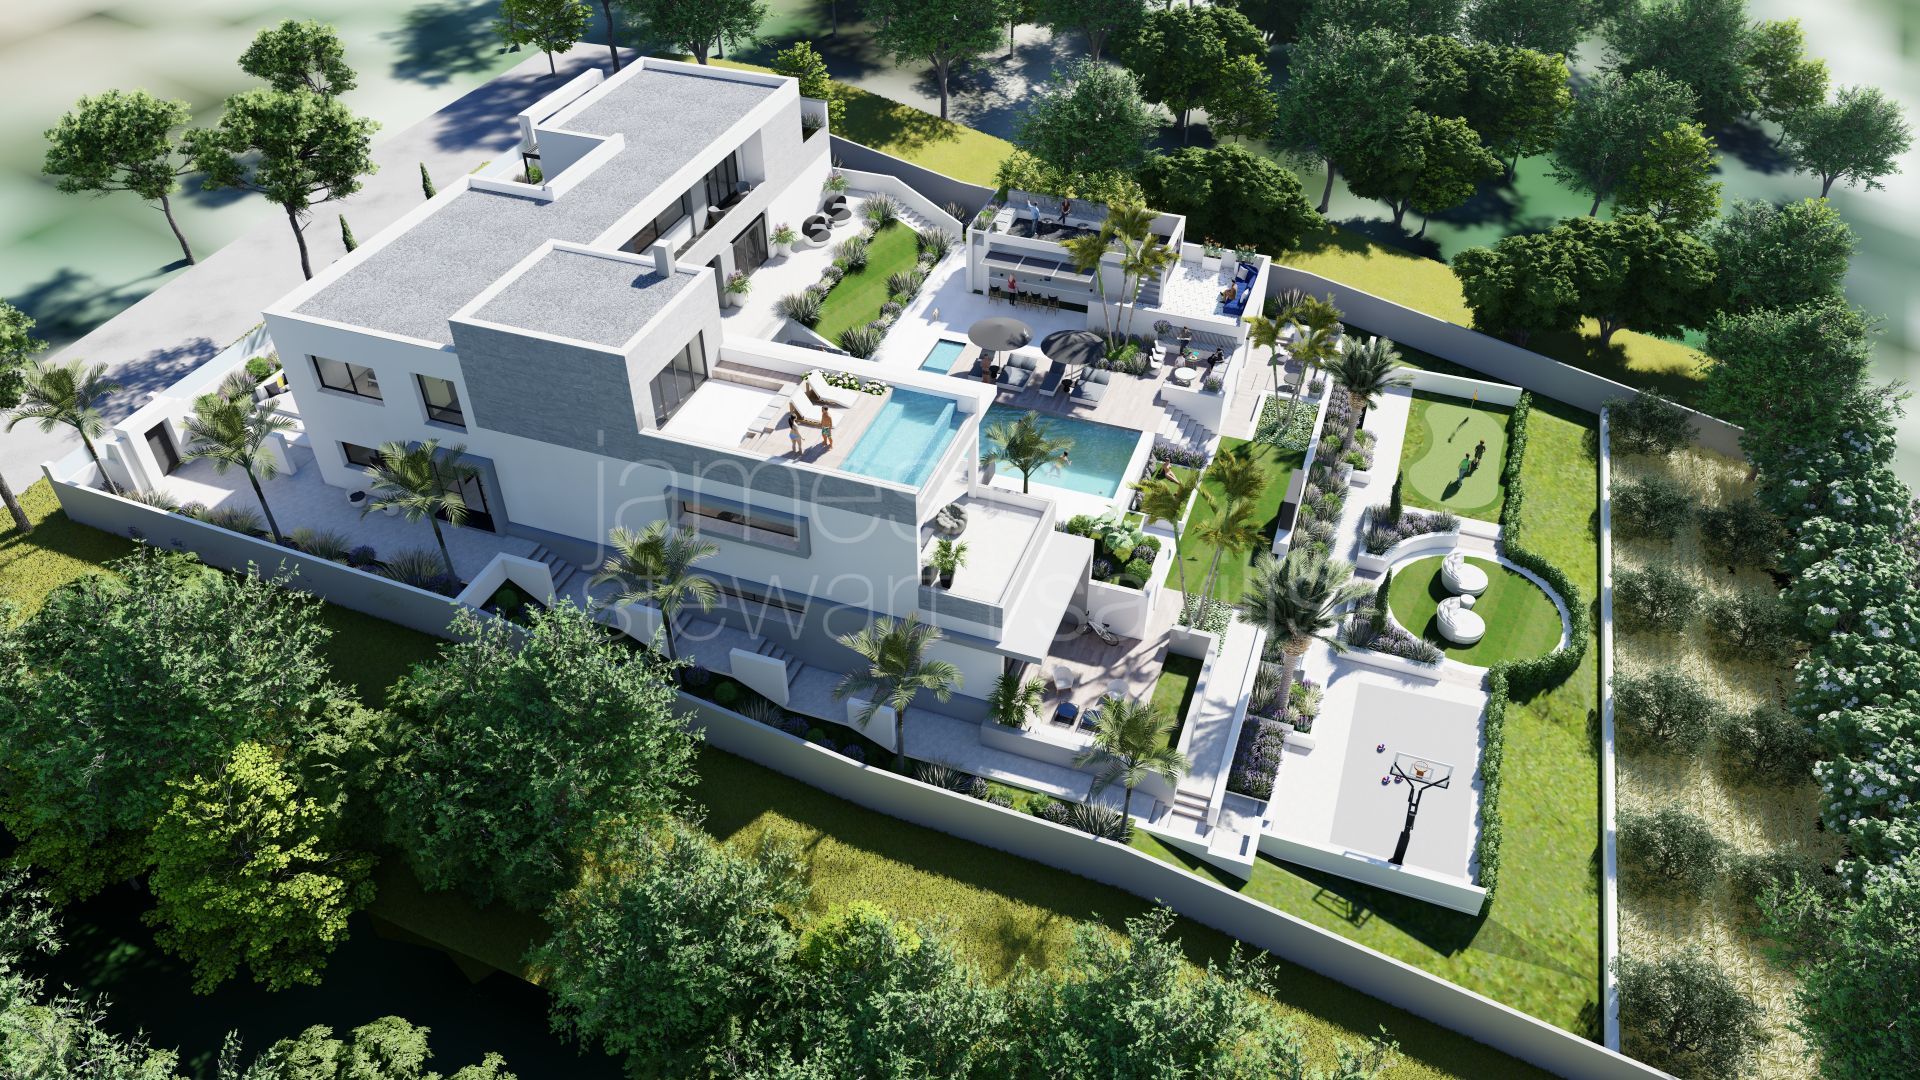 Building plot with stunning villa project approved with views towards La Reserva de Sotogrande